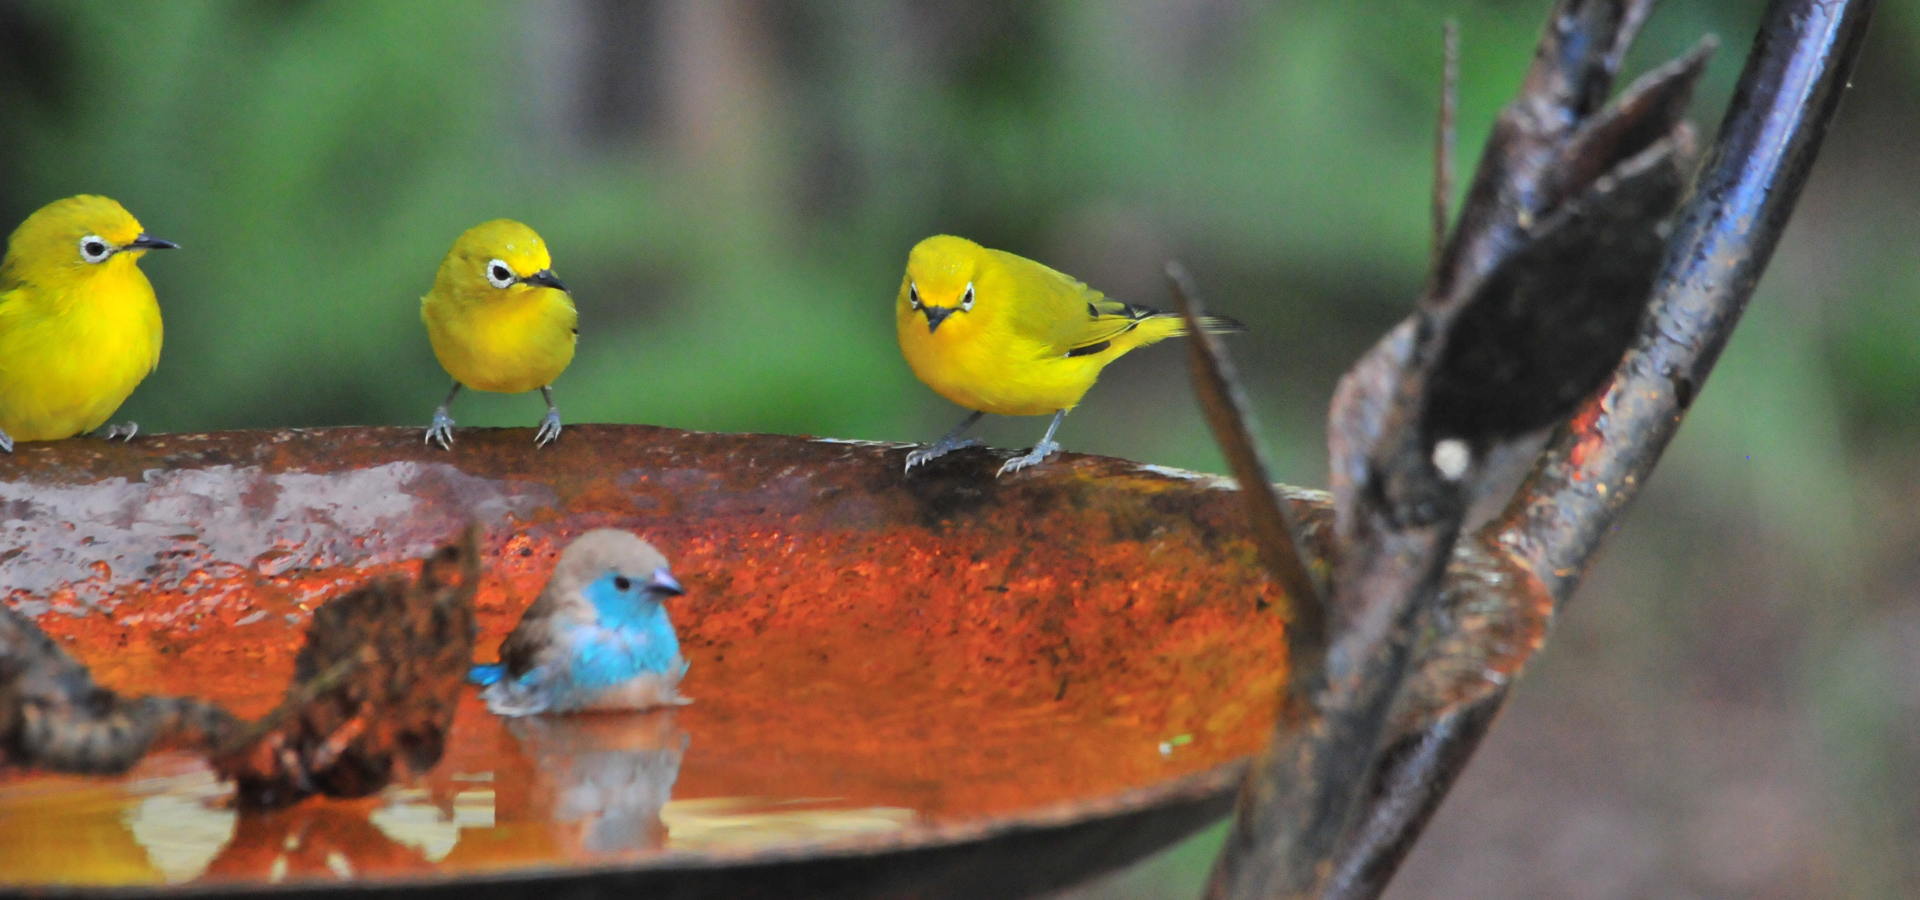 A group of birds sat around a water bowl